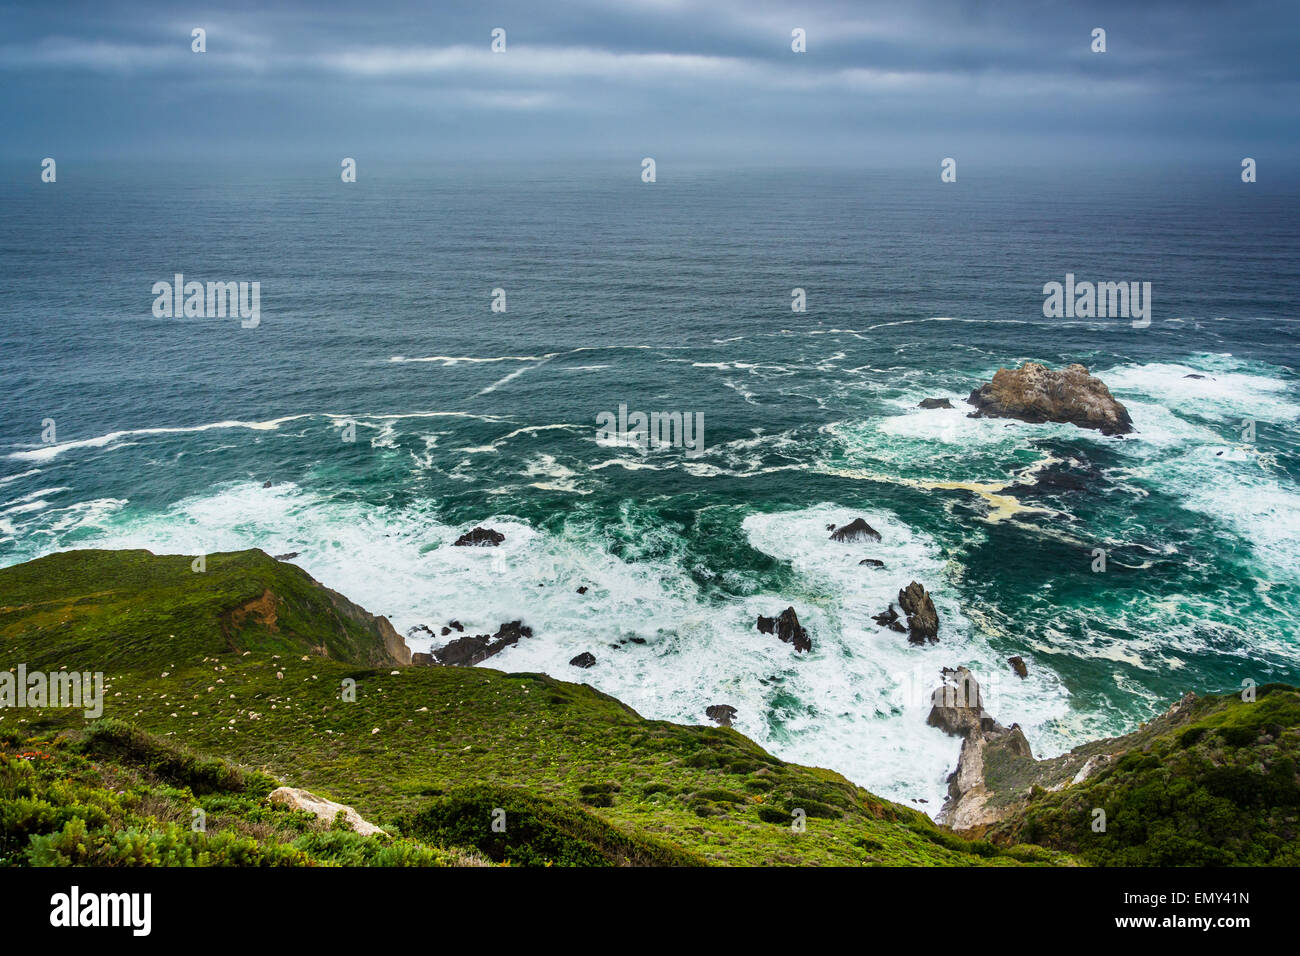 View of the Pacific Ocean in Big Sur, California. Stock Photo